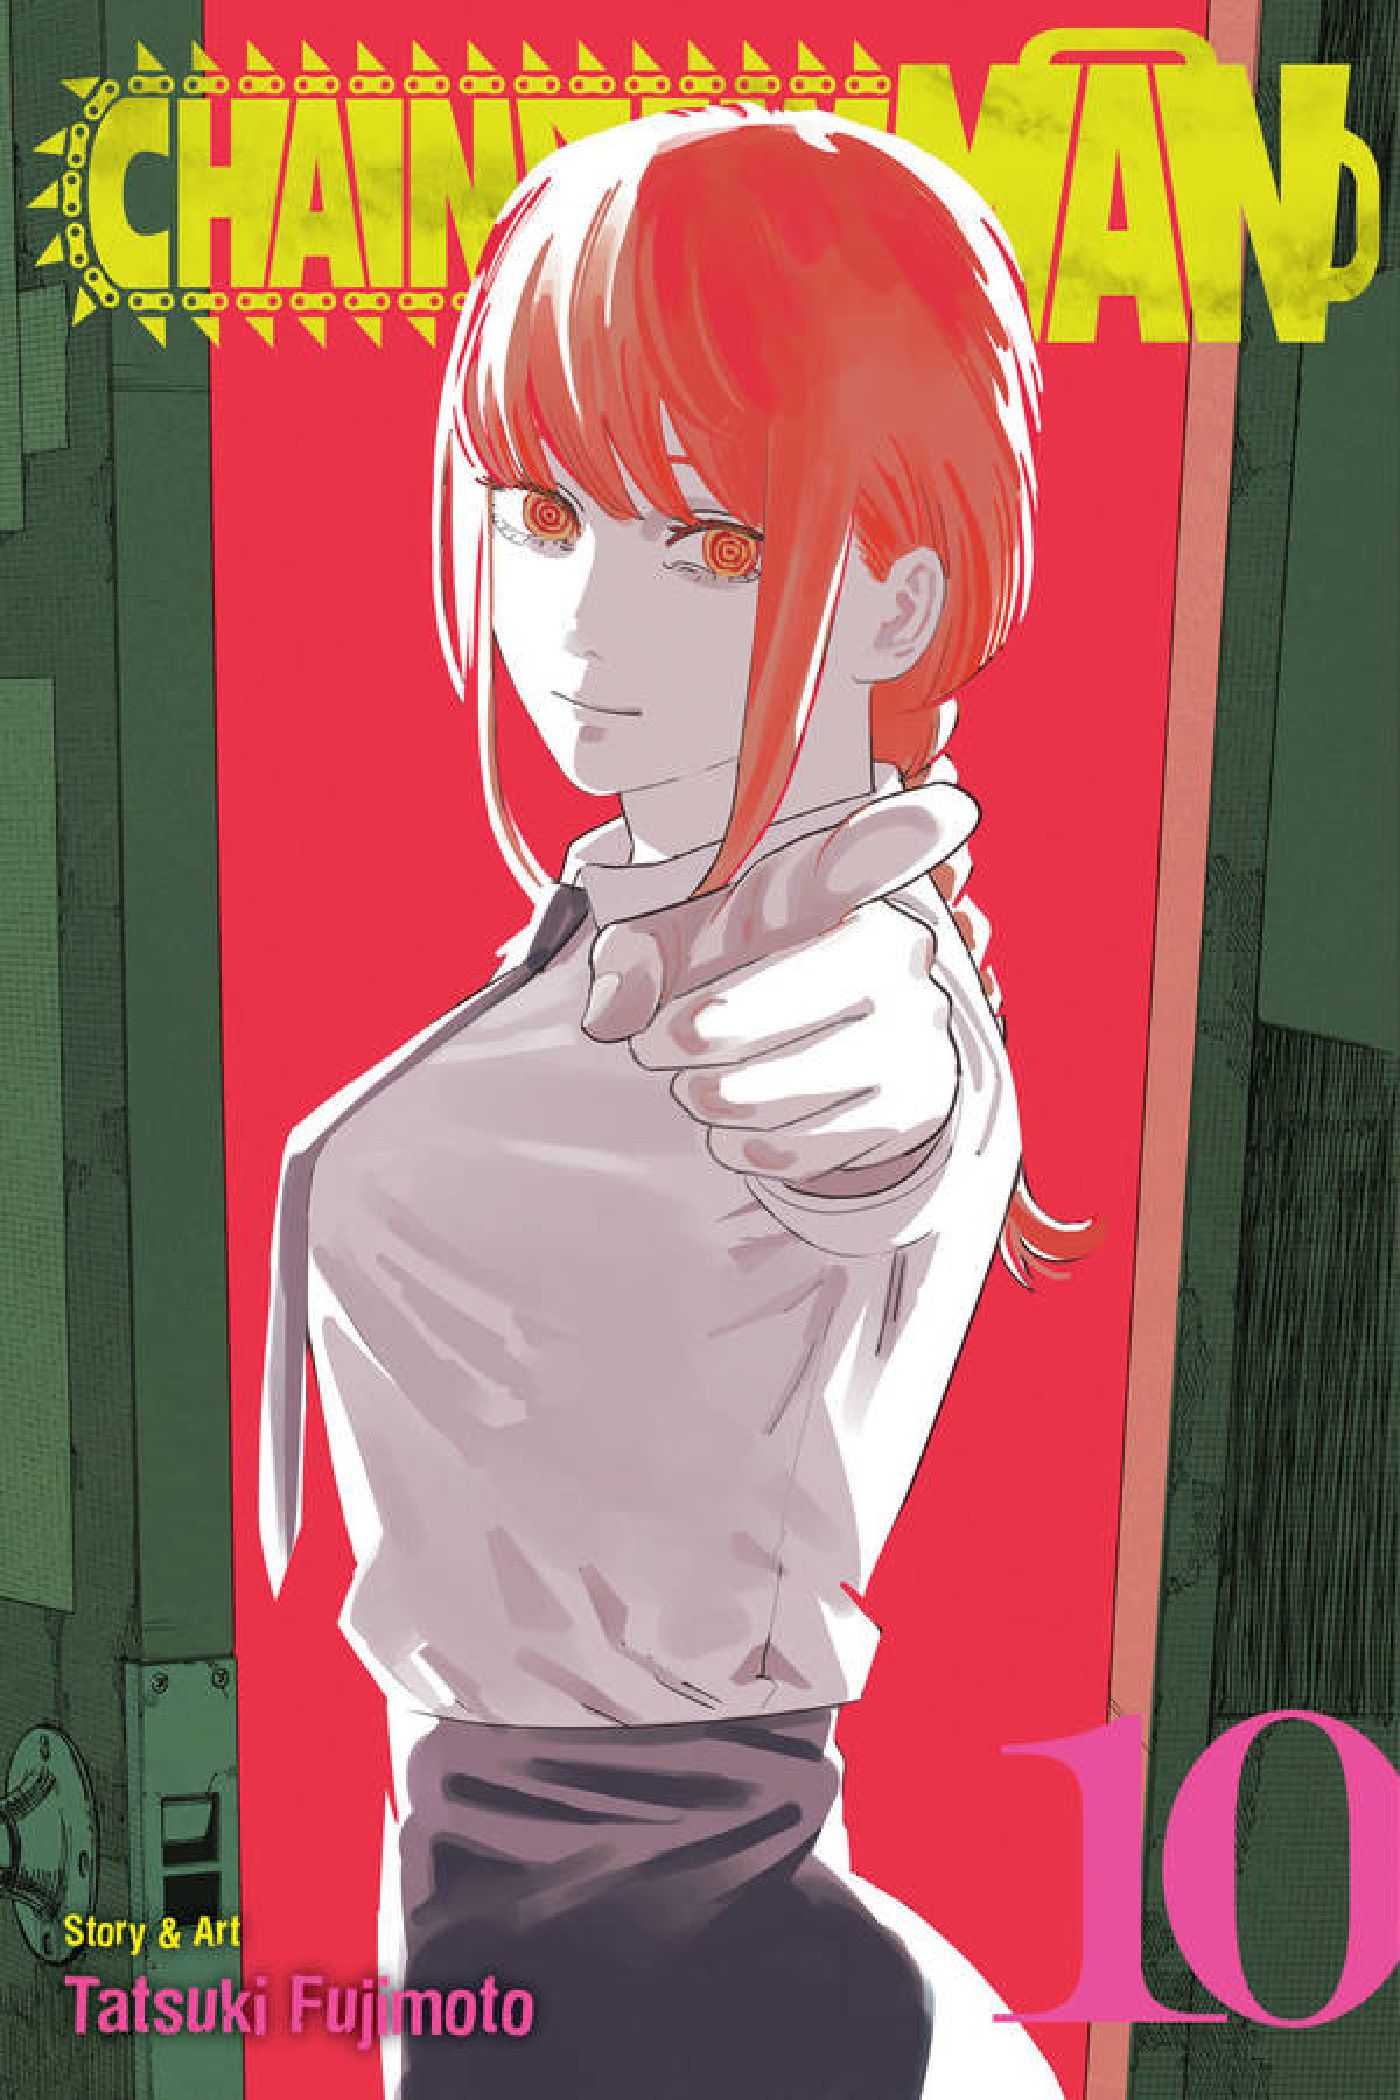 Chainsaw Man Volume 10 cover depicting Makima Pointing in front of an open door.